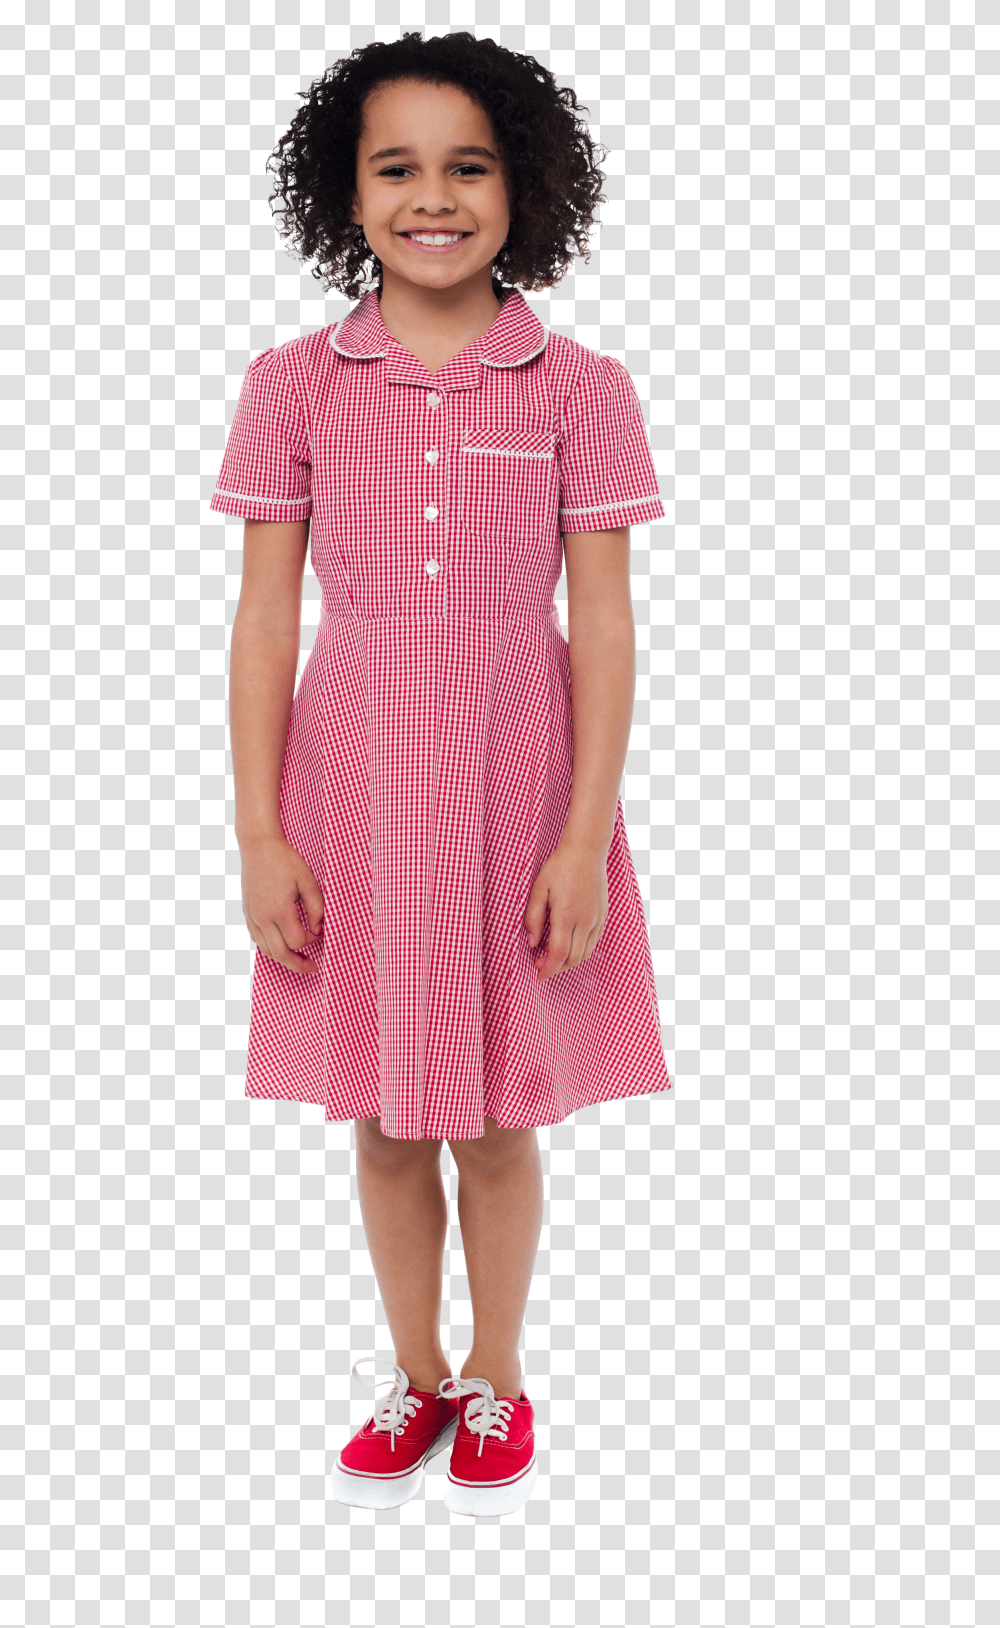 Child Girl Images Child Standing Transparent Png